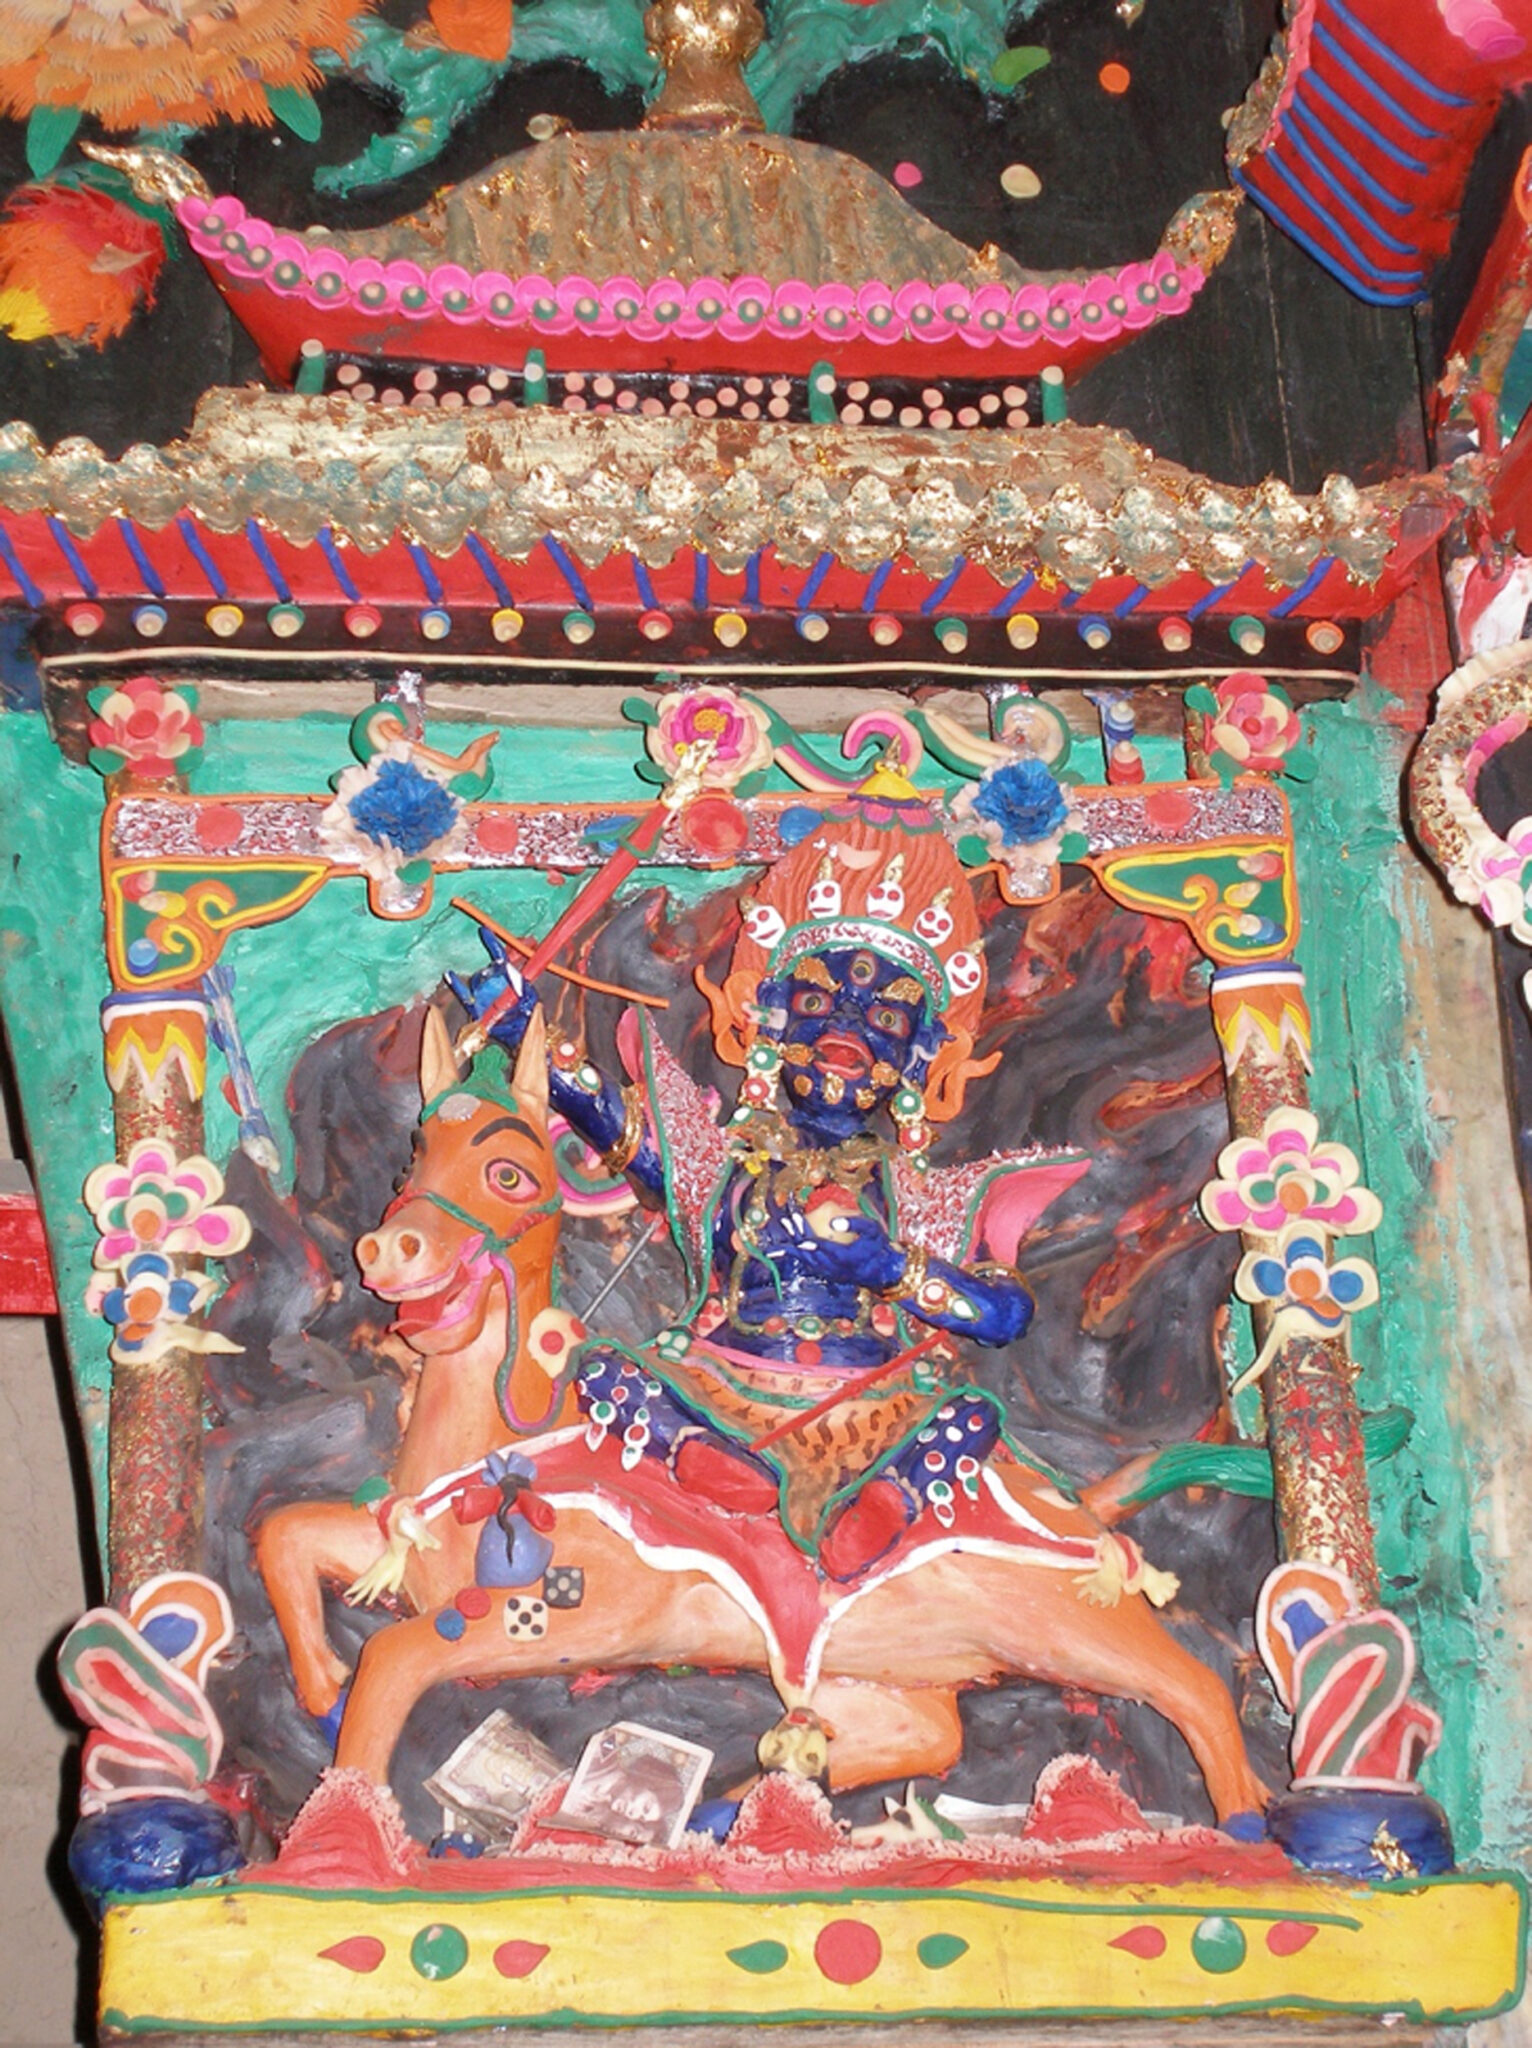 Colorful butter sculpture depicting wrathful deity with blue skin and crown of skulls riding atop horse